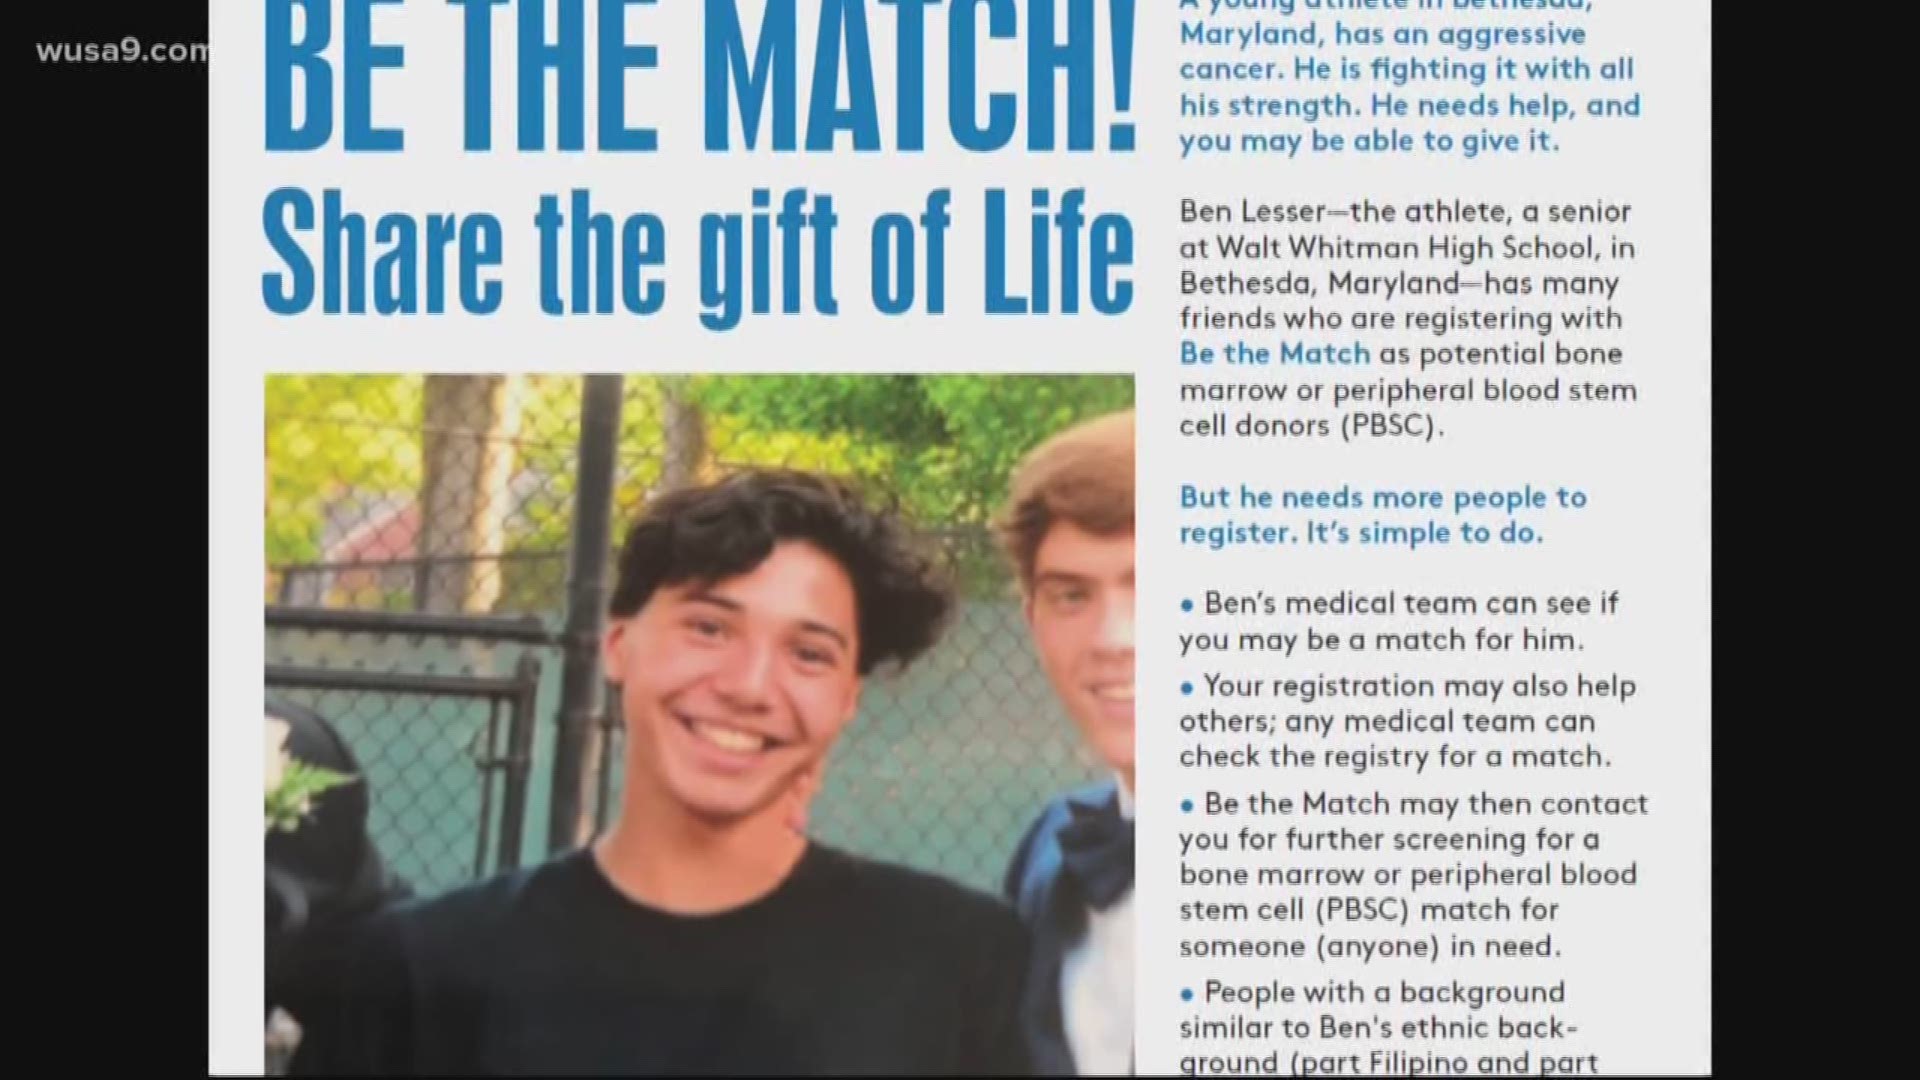 The Walt Whitman High School senior and track star was diagnosed with an aggressive form of Leukemia last month. He's been in an Intensive Care Unit ever since.